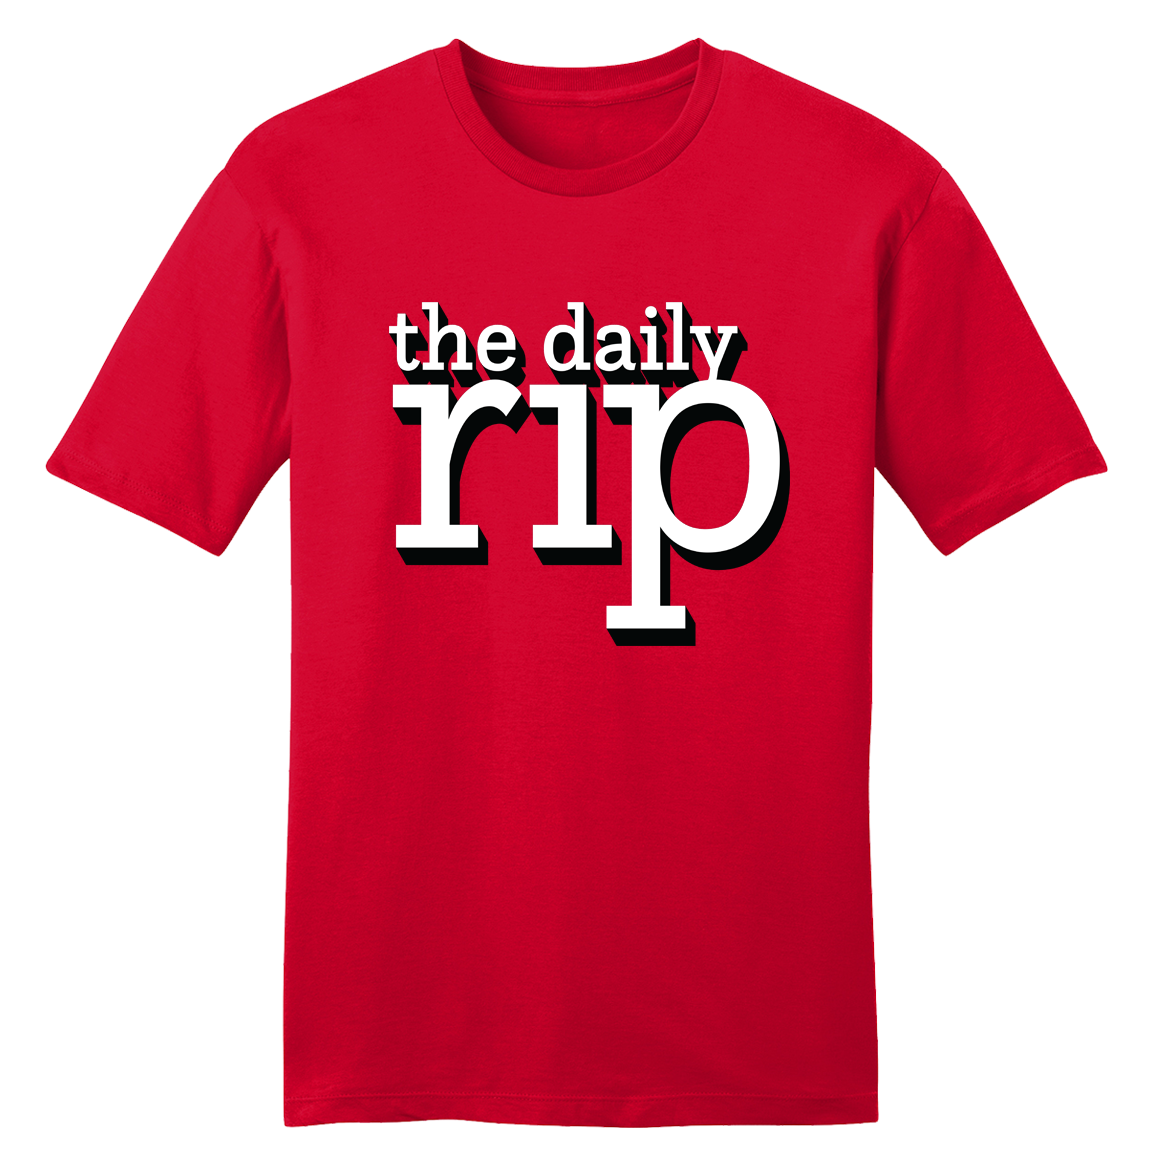 The Daily Rip tee